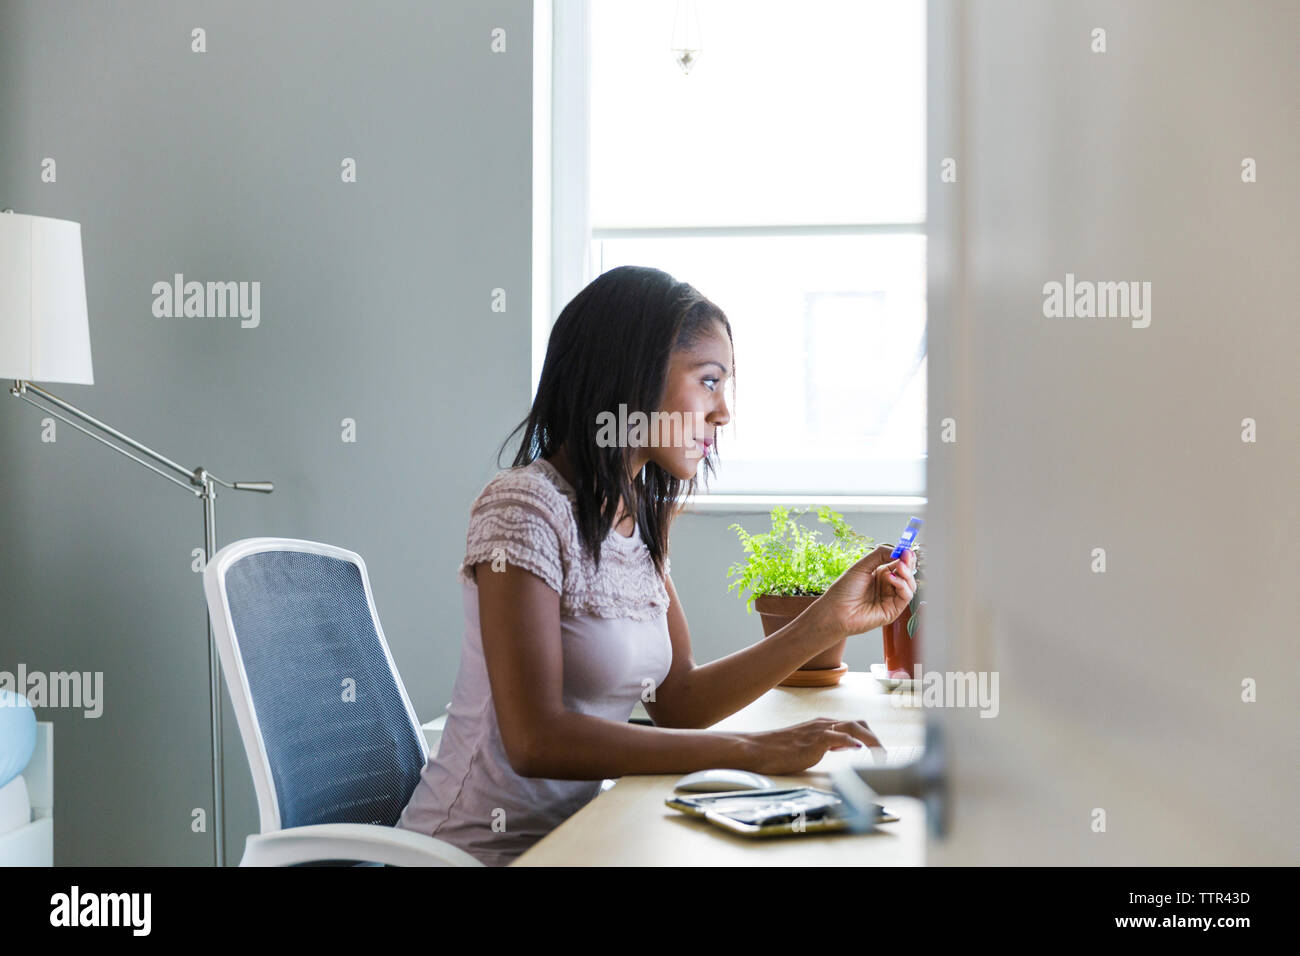 Woman working at home office seen through doorway Stock Photo